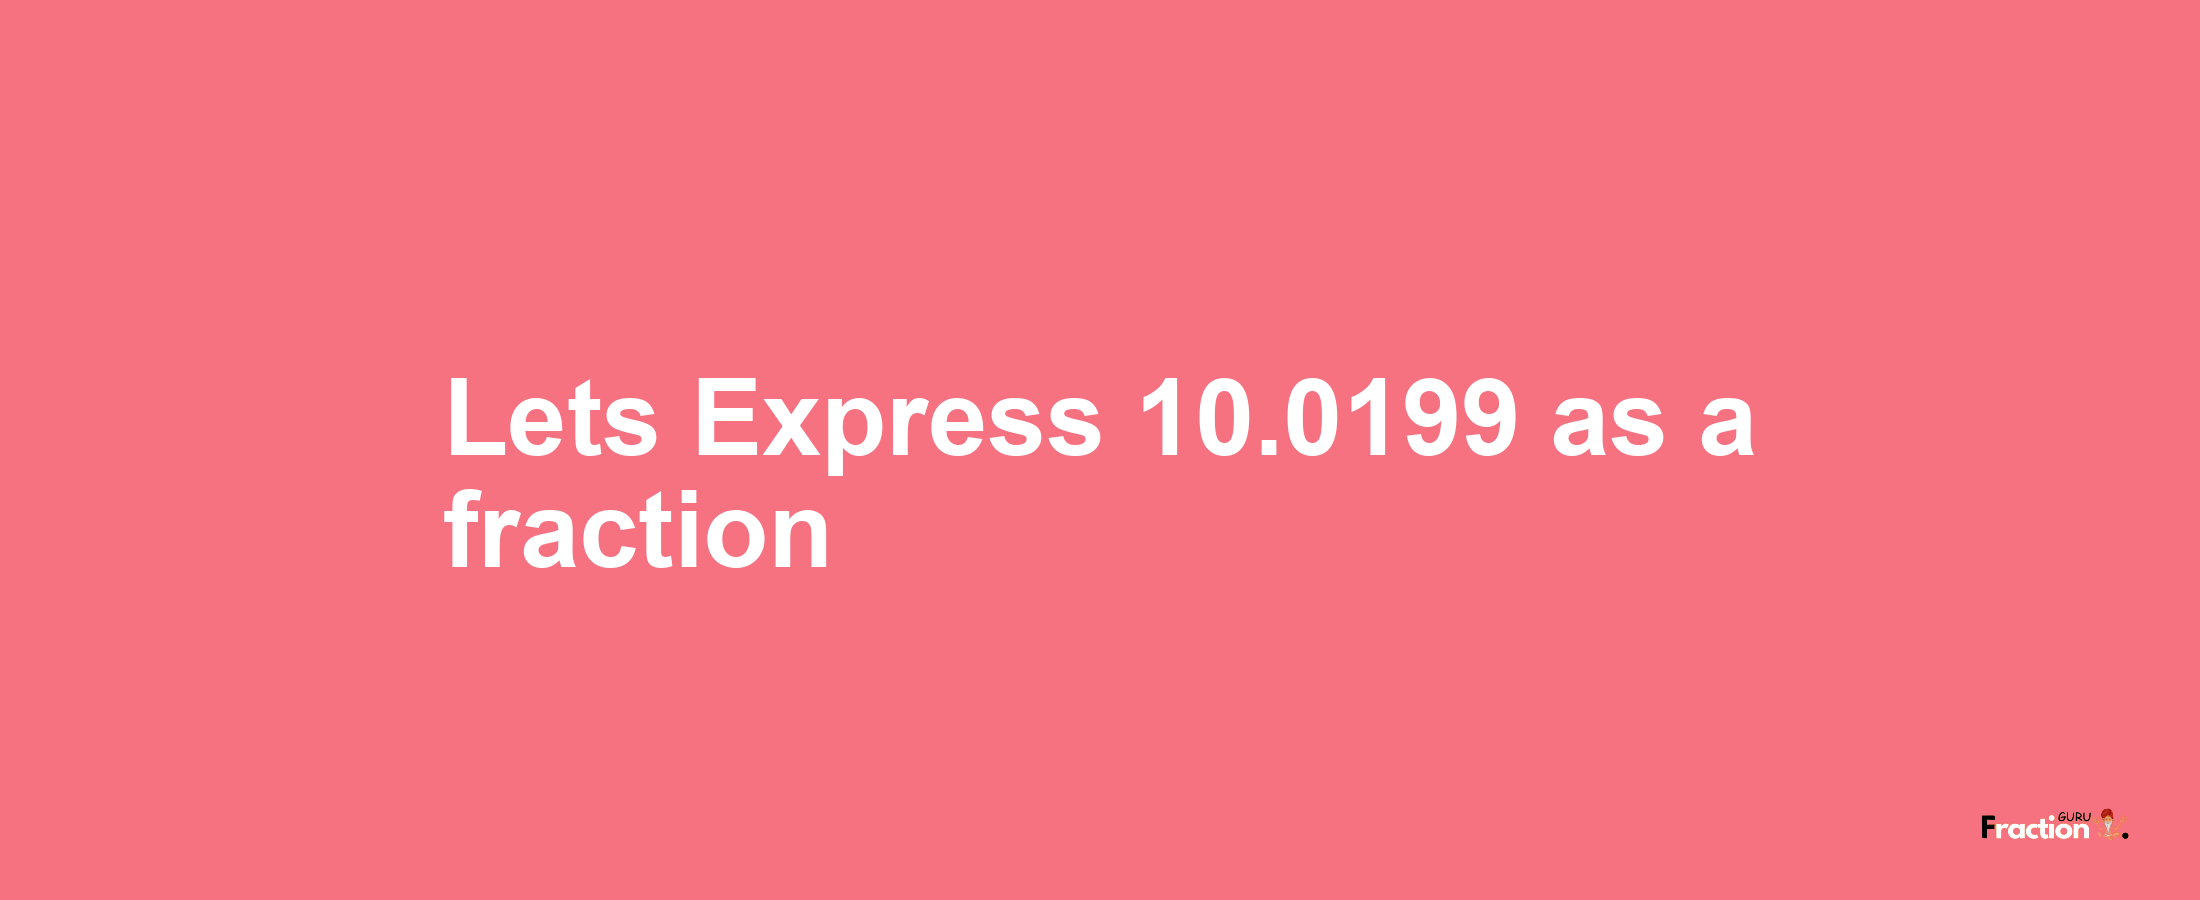 Lets Express 10.0199 as afraction